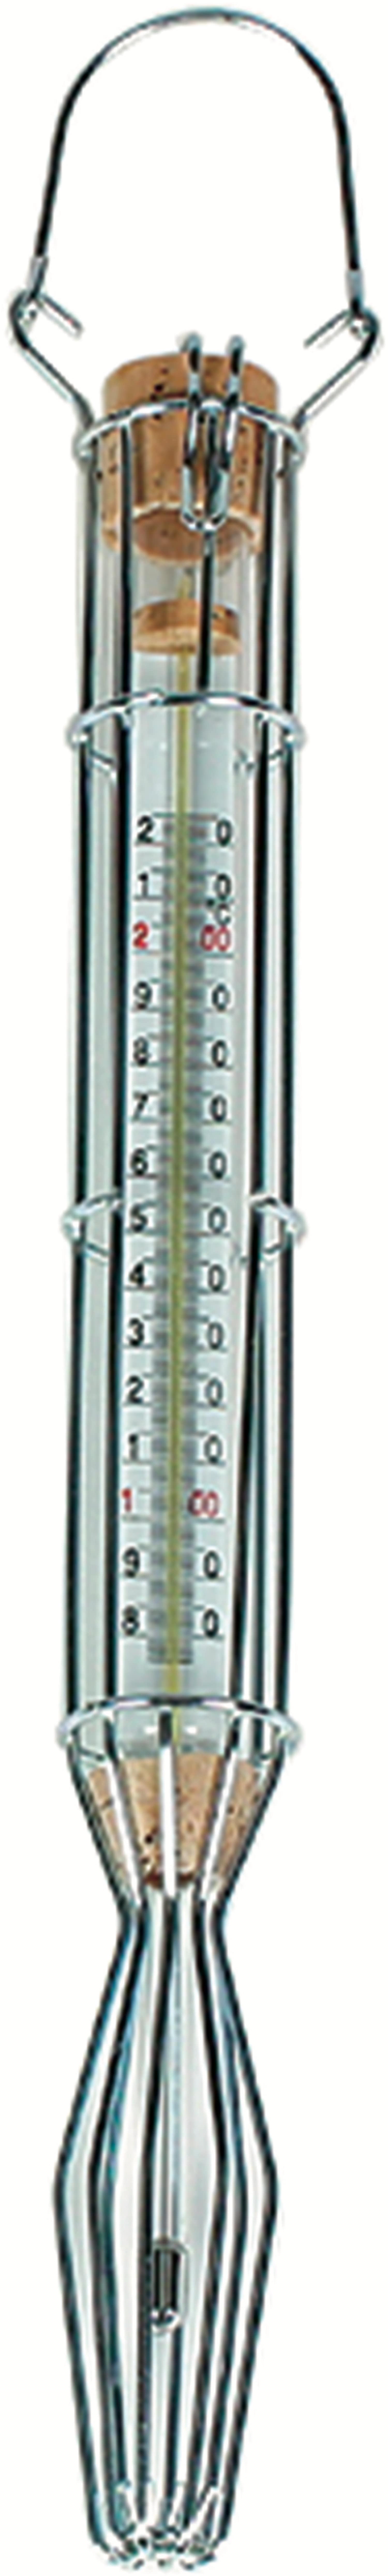 Thermometer 160001 160001